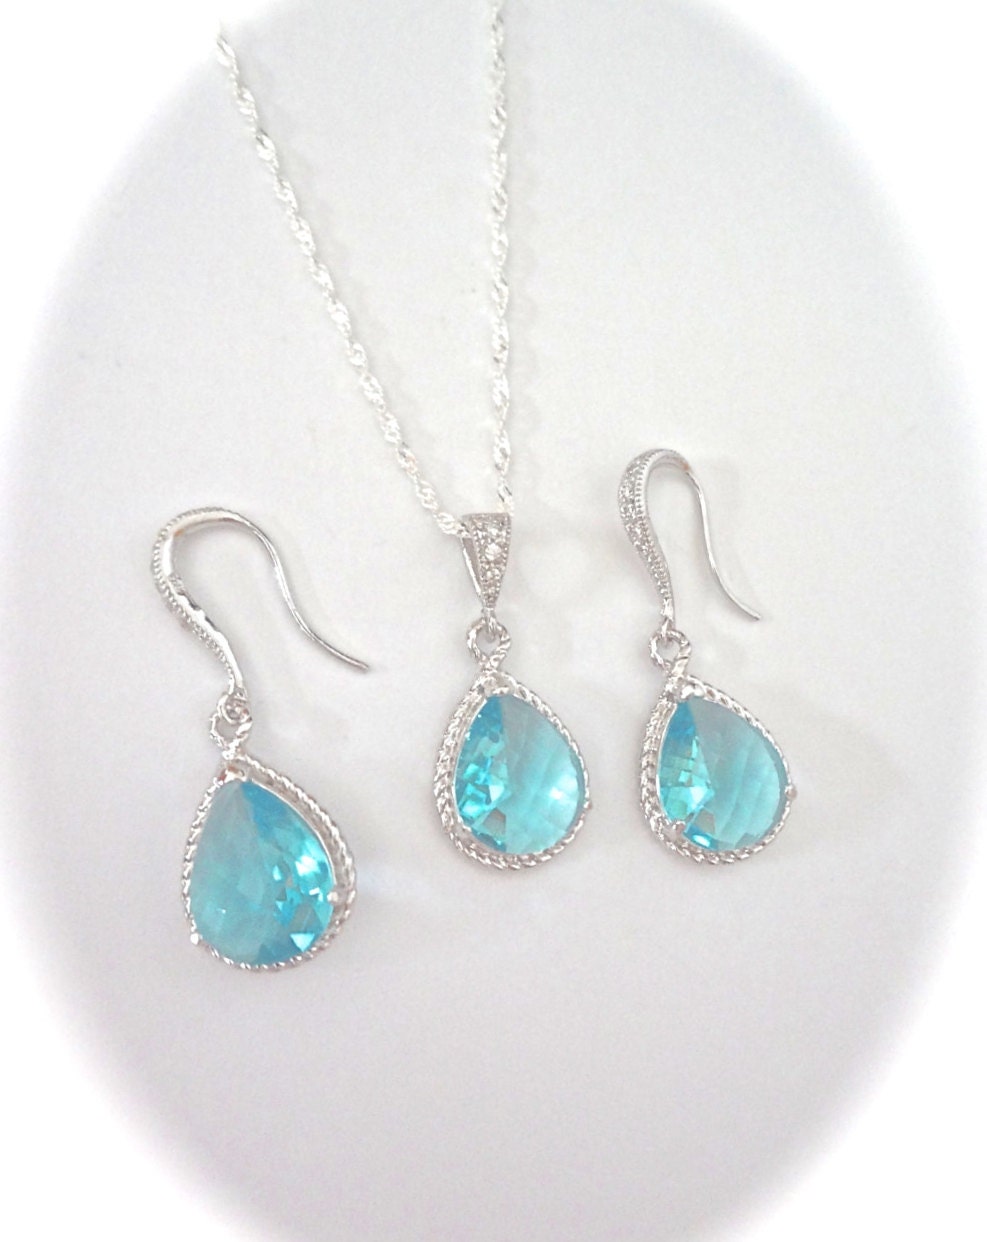 Aquamarine Necklace And Earring Set By Queenmejewelryllc On Etsy